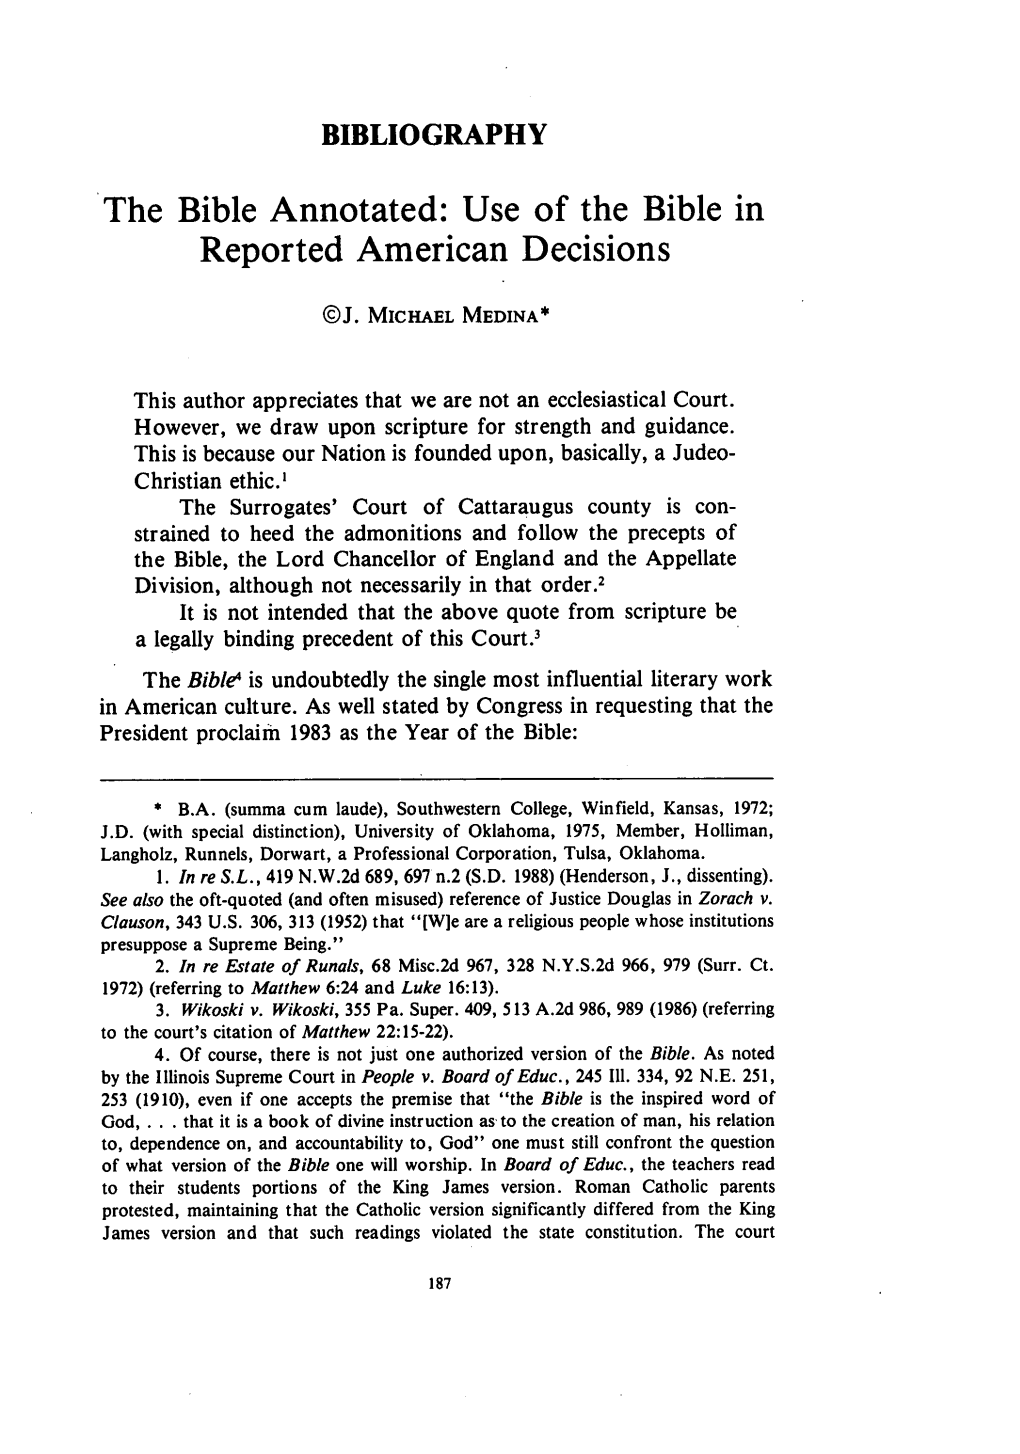 The Bible Annotated: Use of the Bible in Reported American Decisions